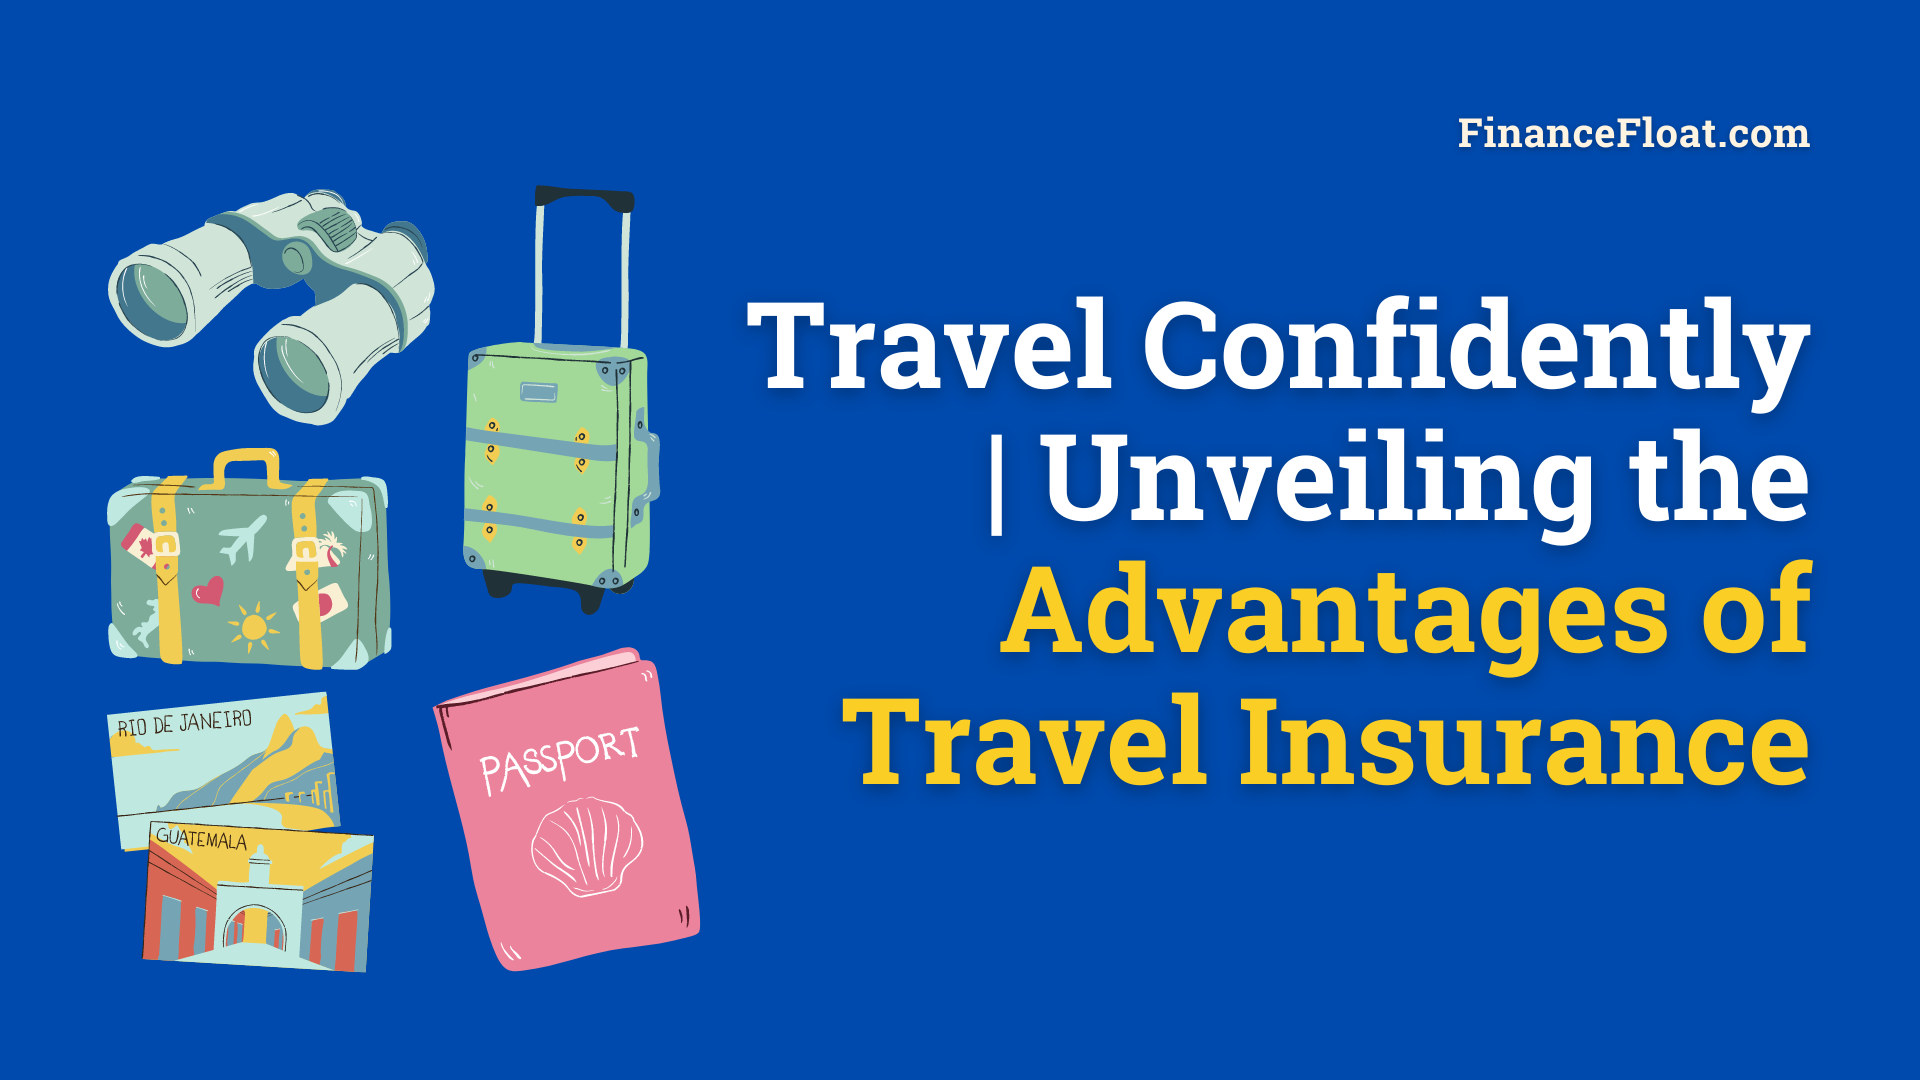 Travel Confidently Unveiling the Advantages of Travel Insurance